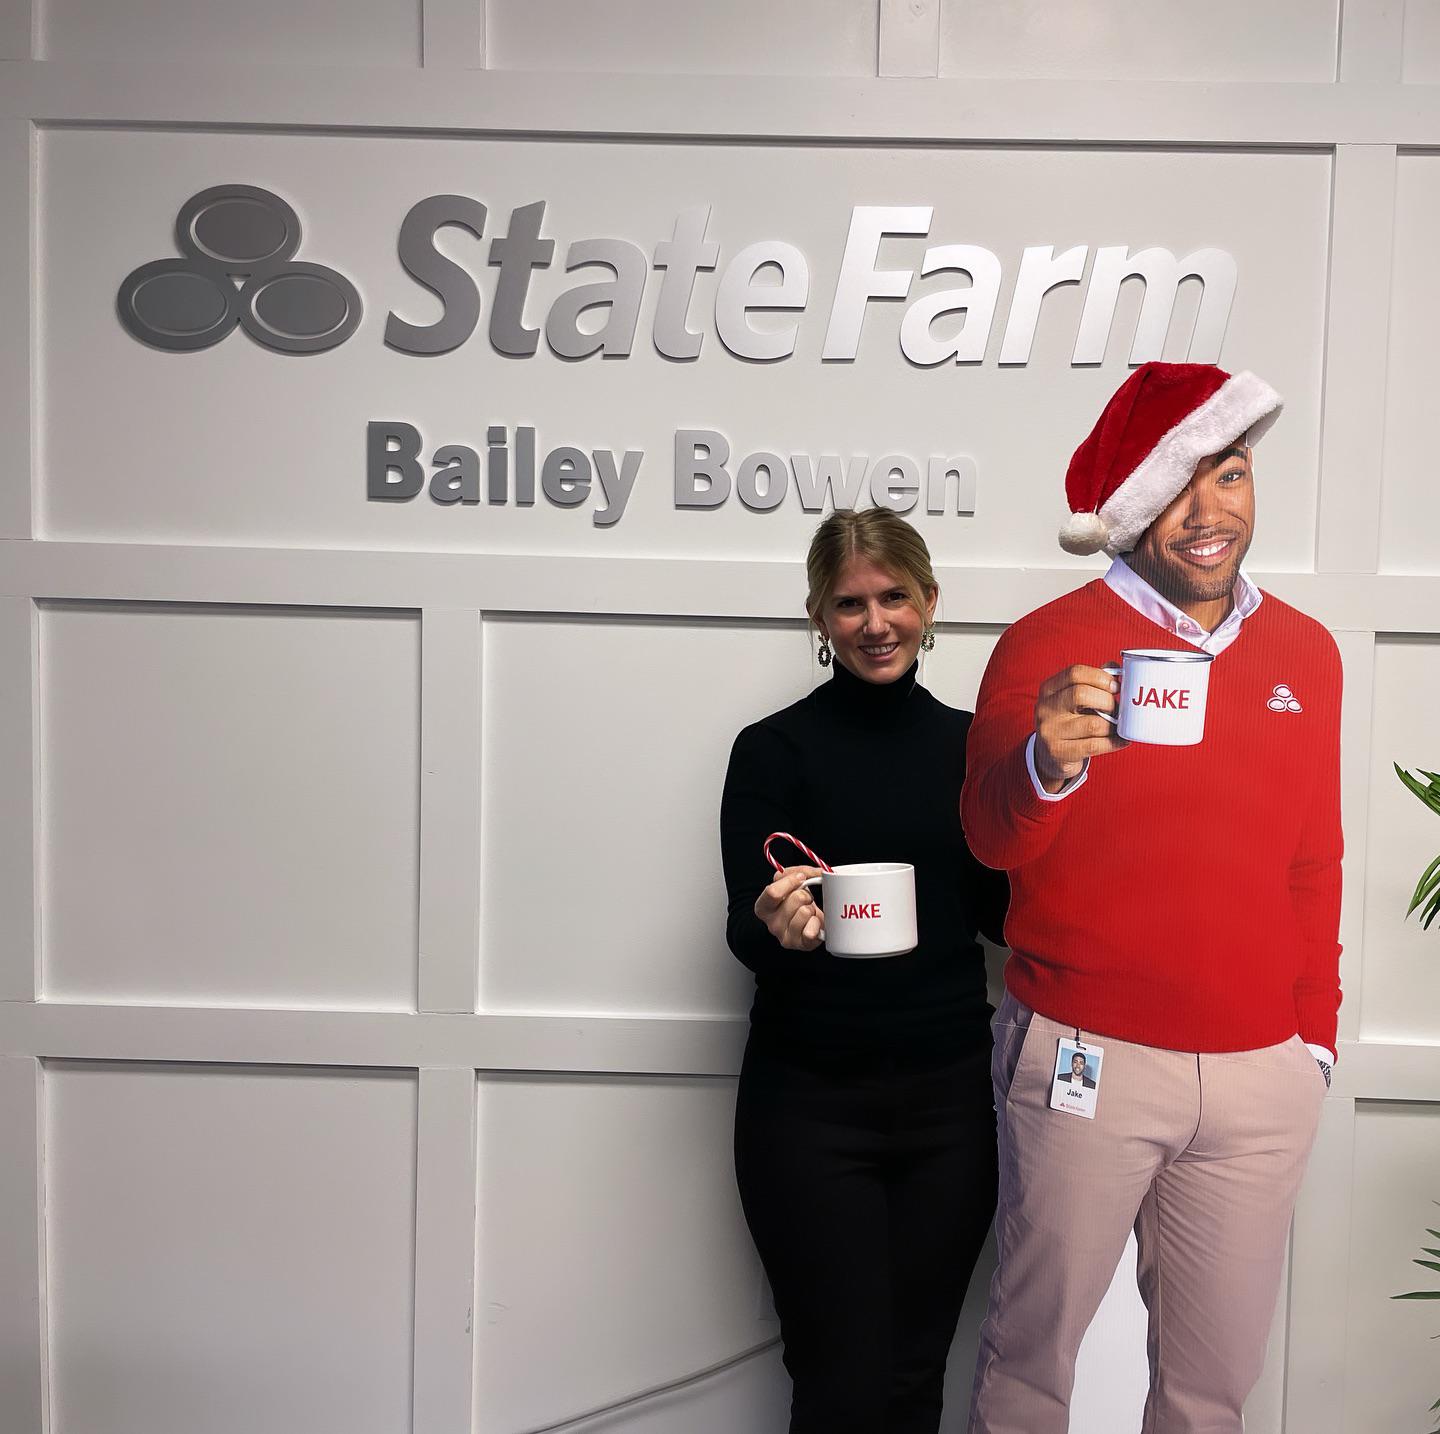 Bailey and Jake are ready to take on the holidays, are you?

Looking to start fresh in the new year? Bailey Bowen would love to help with all your insurance needs. Use the link in our bio to get started on your free custom quote!